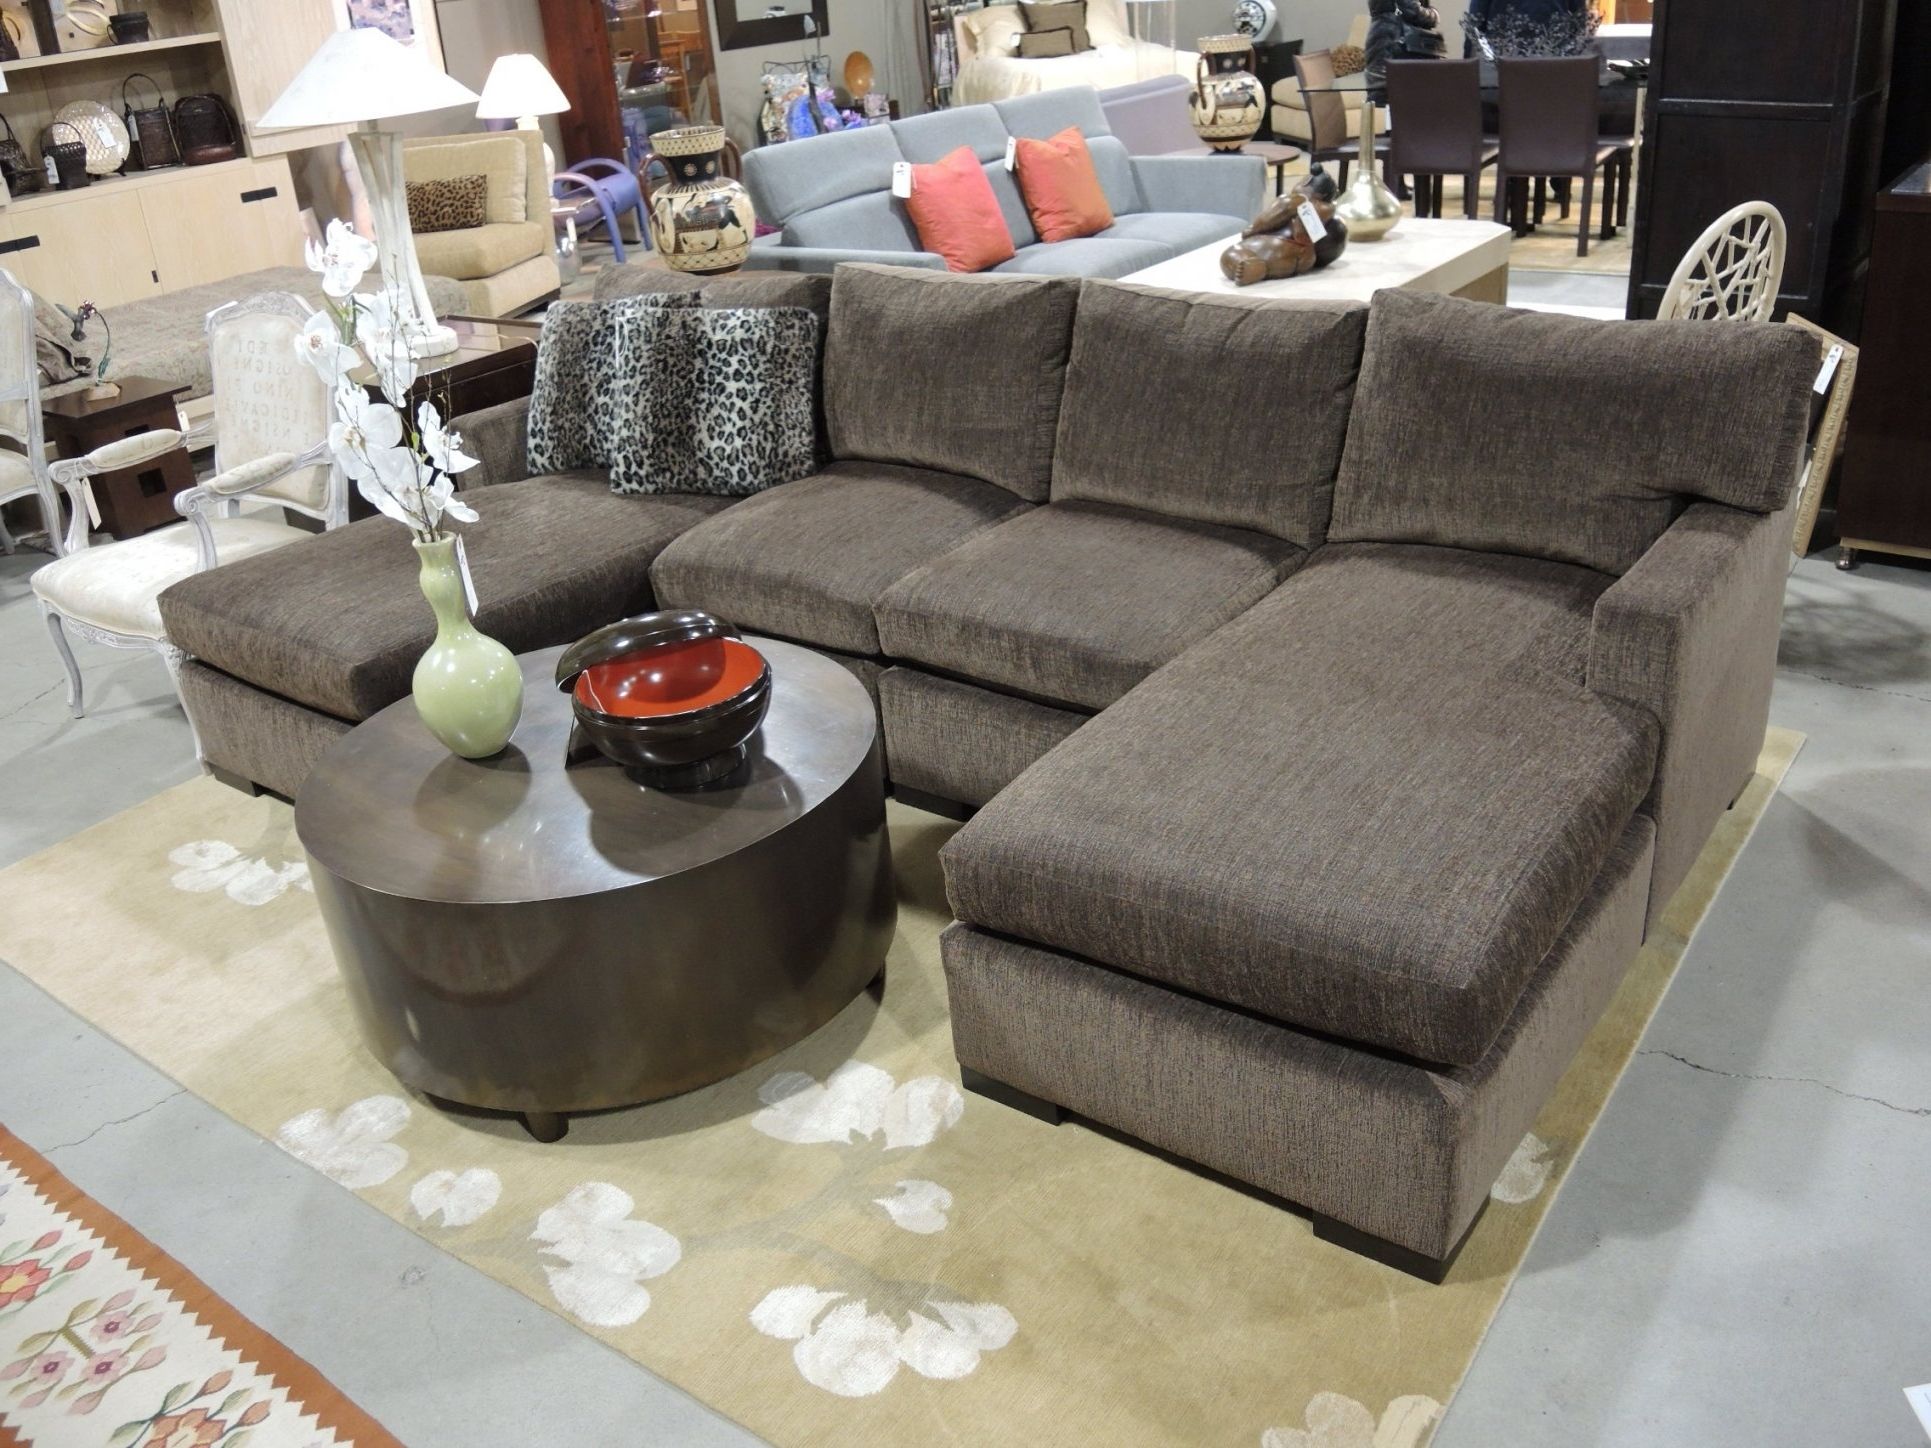 Double Chaises In Best And Newest Sofa Design: Super Quality Double Chaise Sectional Sofa Inside (View 12 of 15)